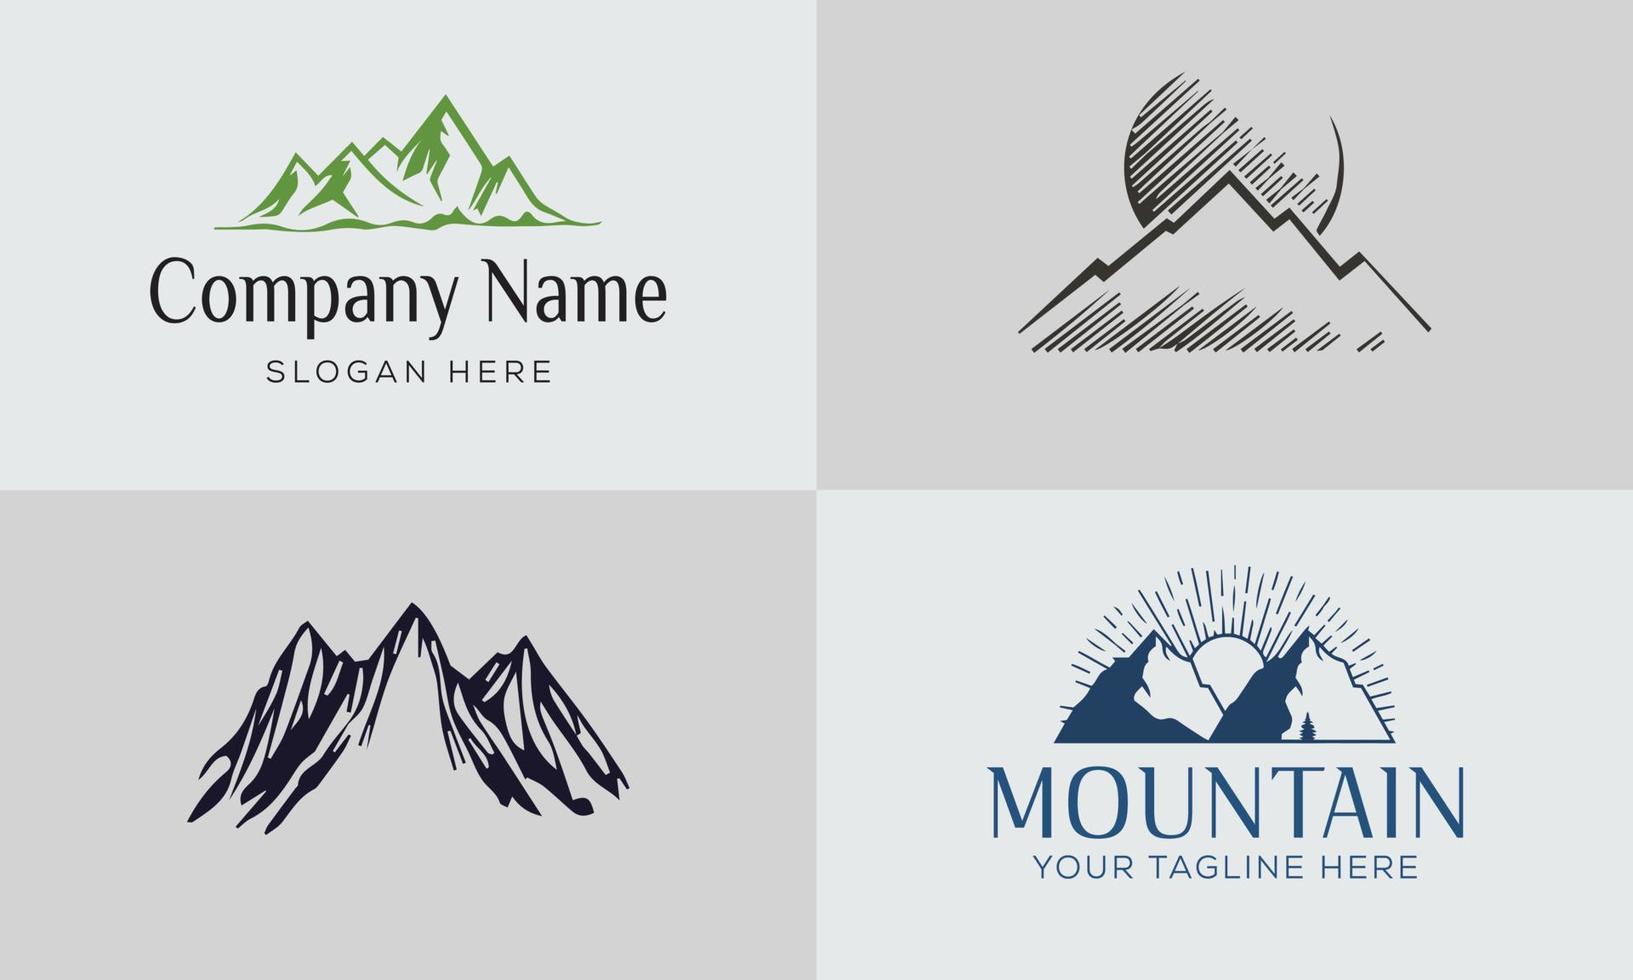 Vintage mountain vector collection, icon silhouette illustrations Free Vector